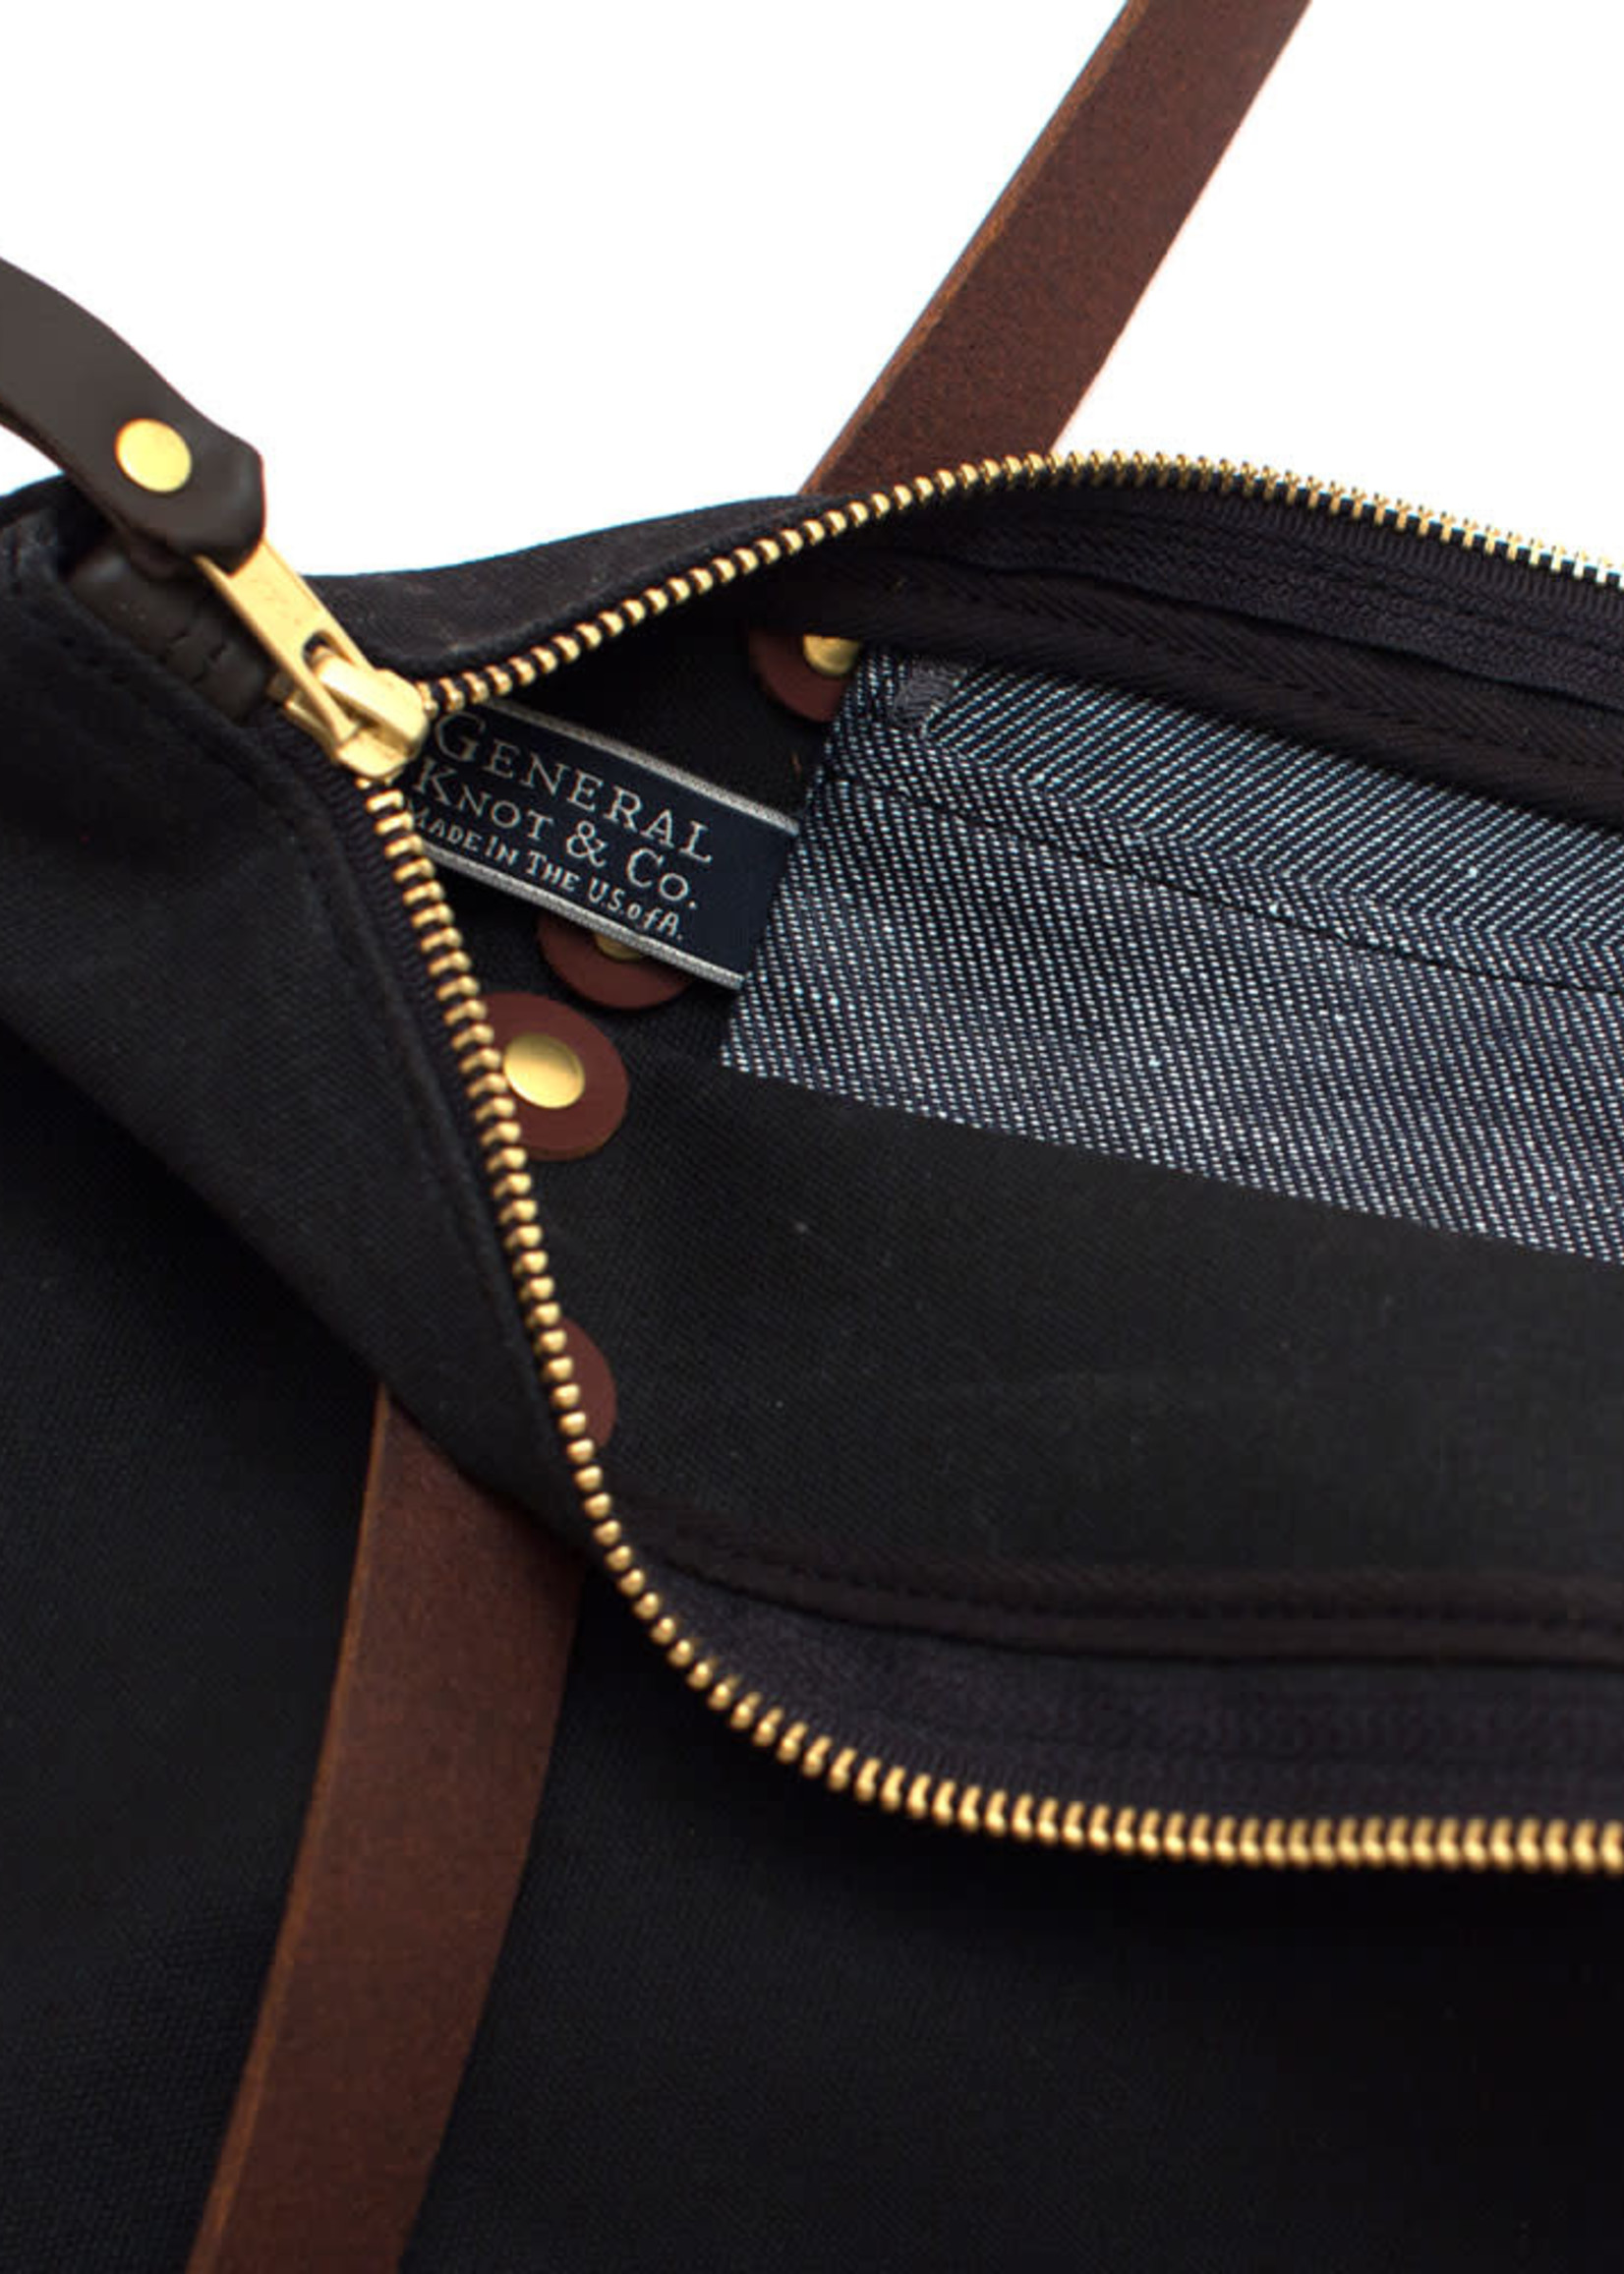 General Knot & Co. Waxed Canvas Tote  Black